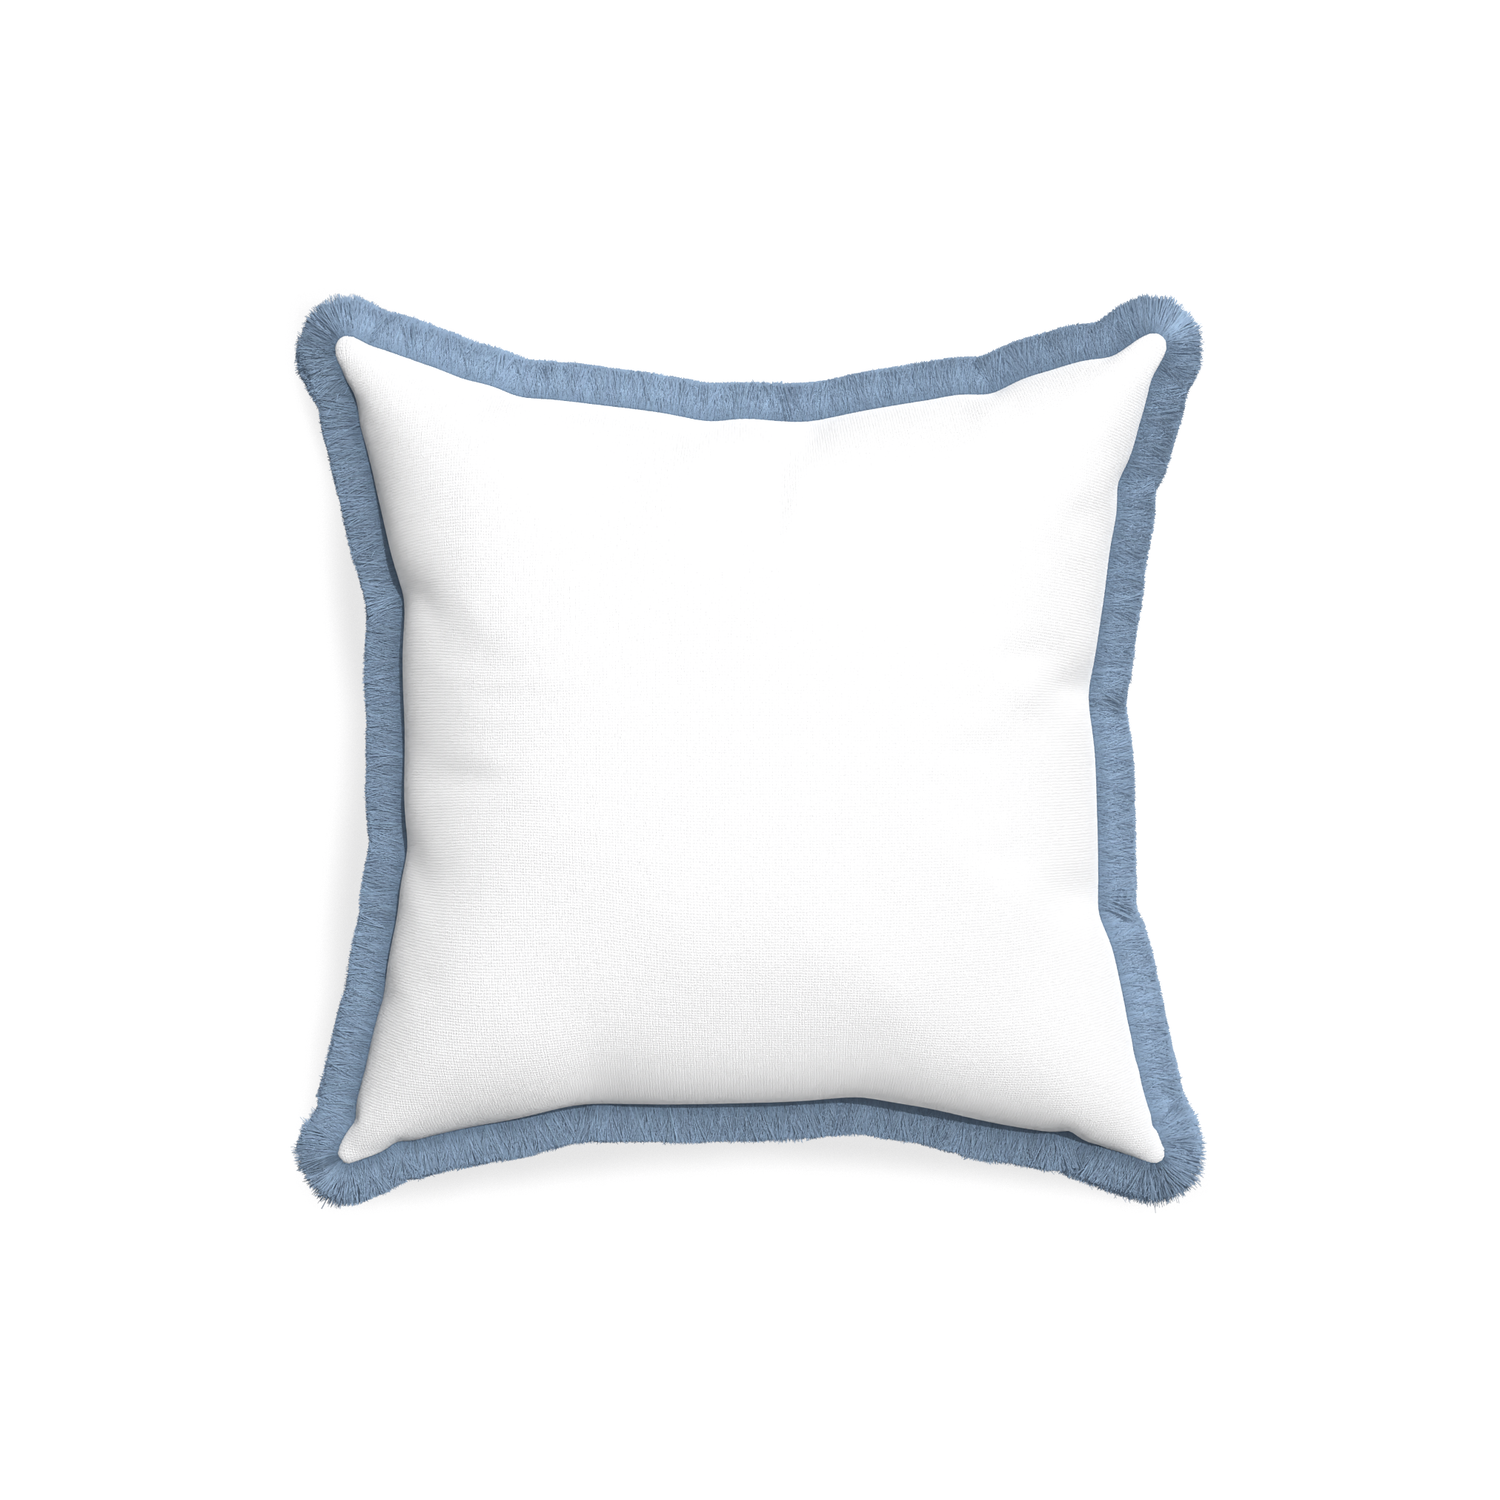 18-square snow custom white cottonpillow with sky fringe on white background